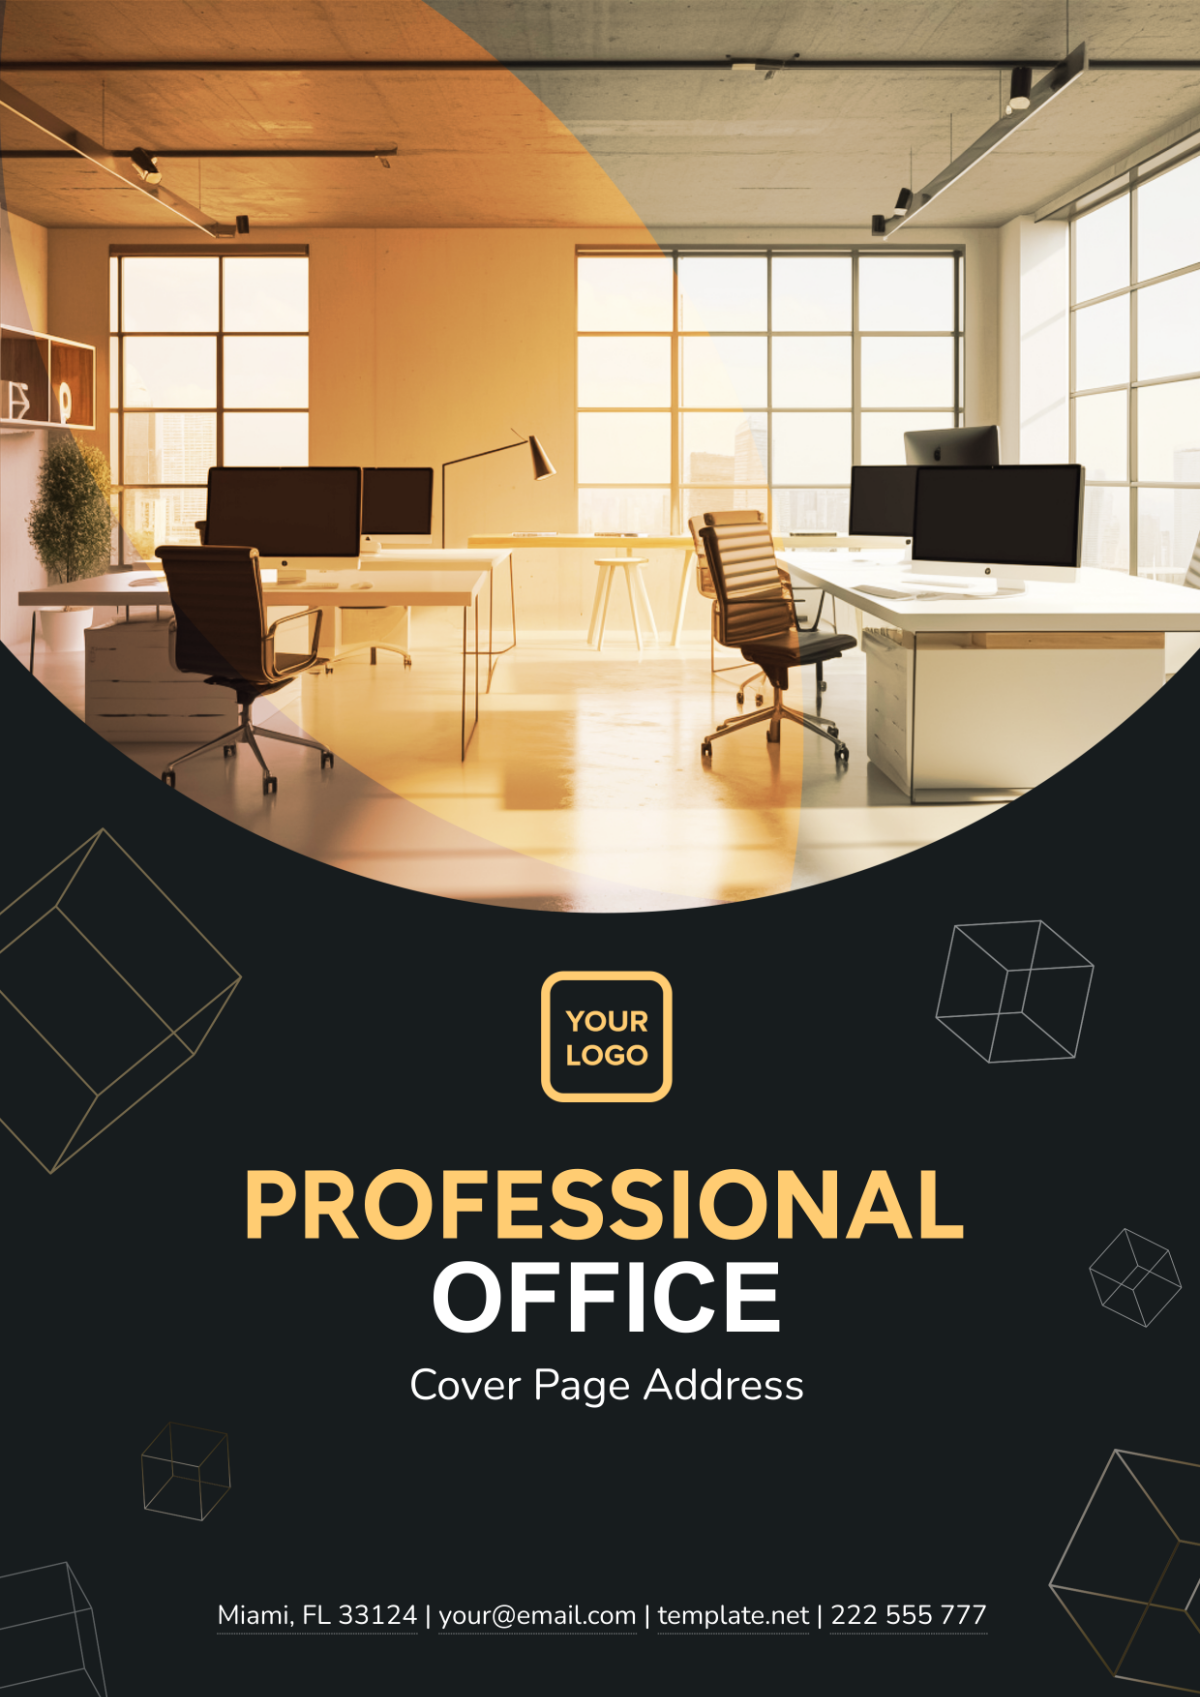 Professional Office Cover Page Address Template